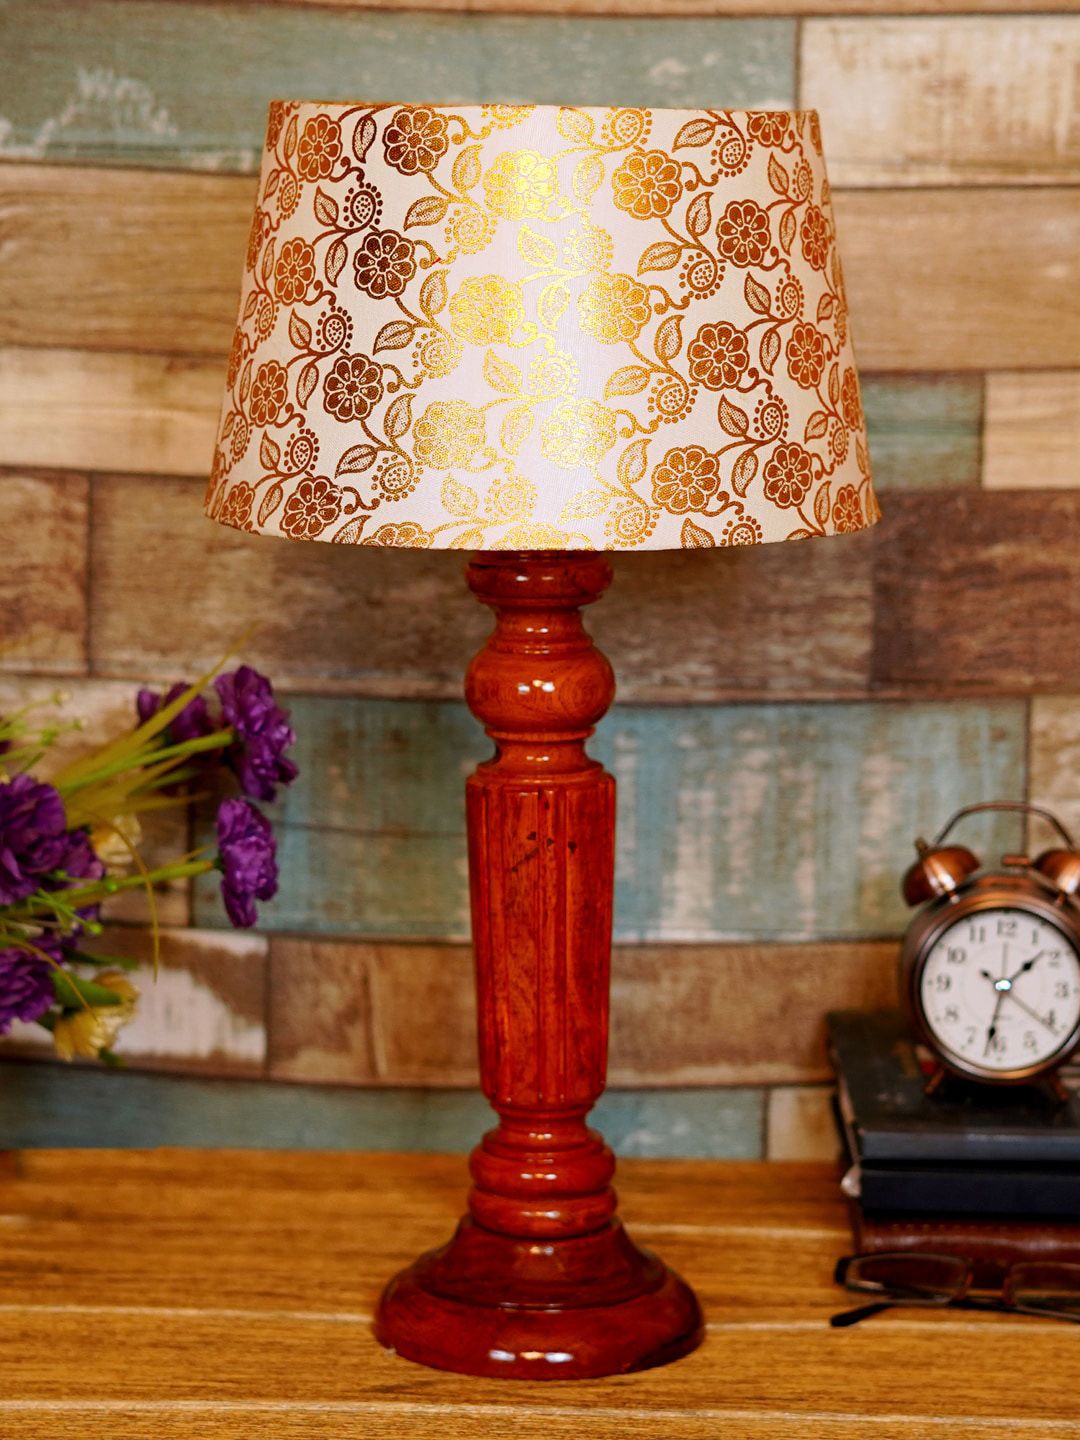 foziq Brown & Gold-Toned Printed Wooden Table Lamp Price in India